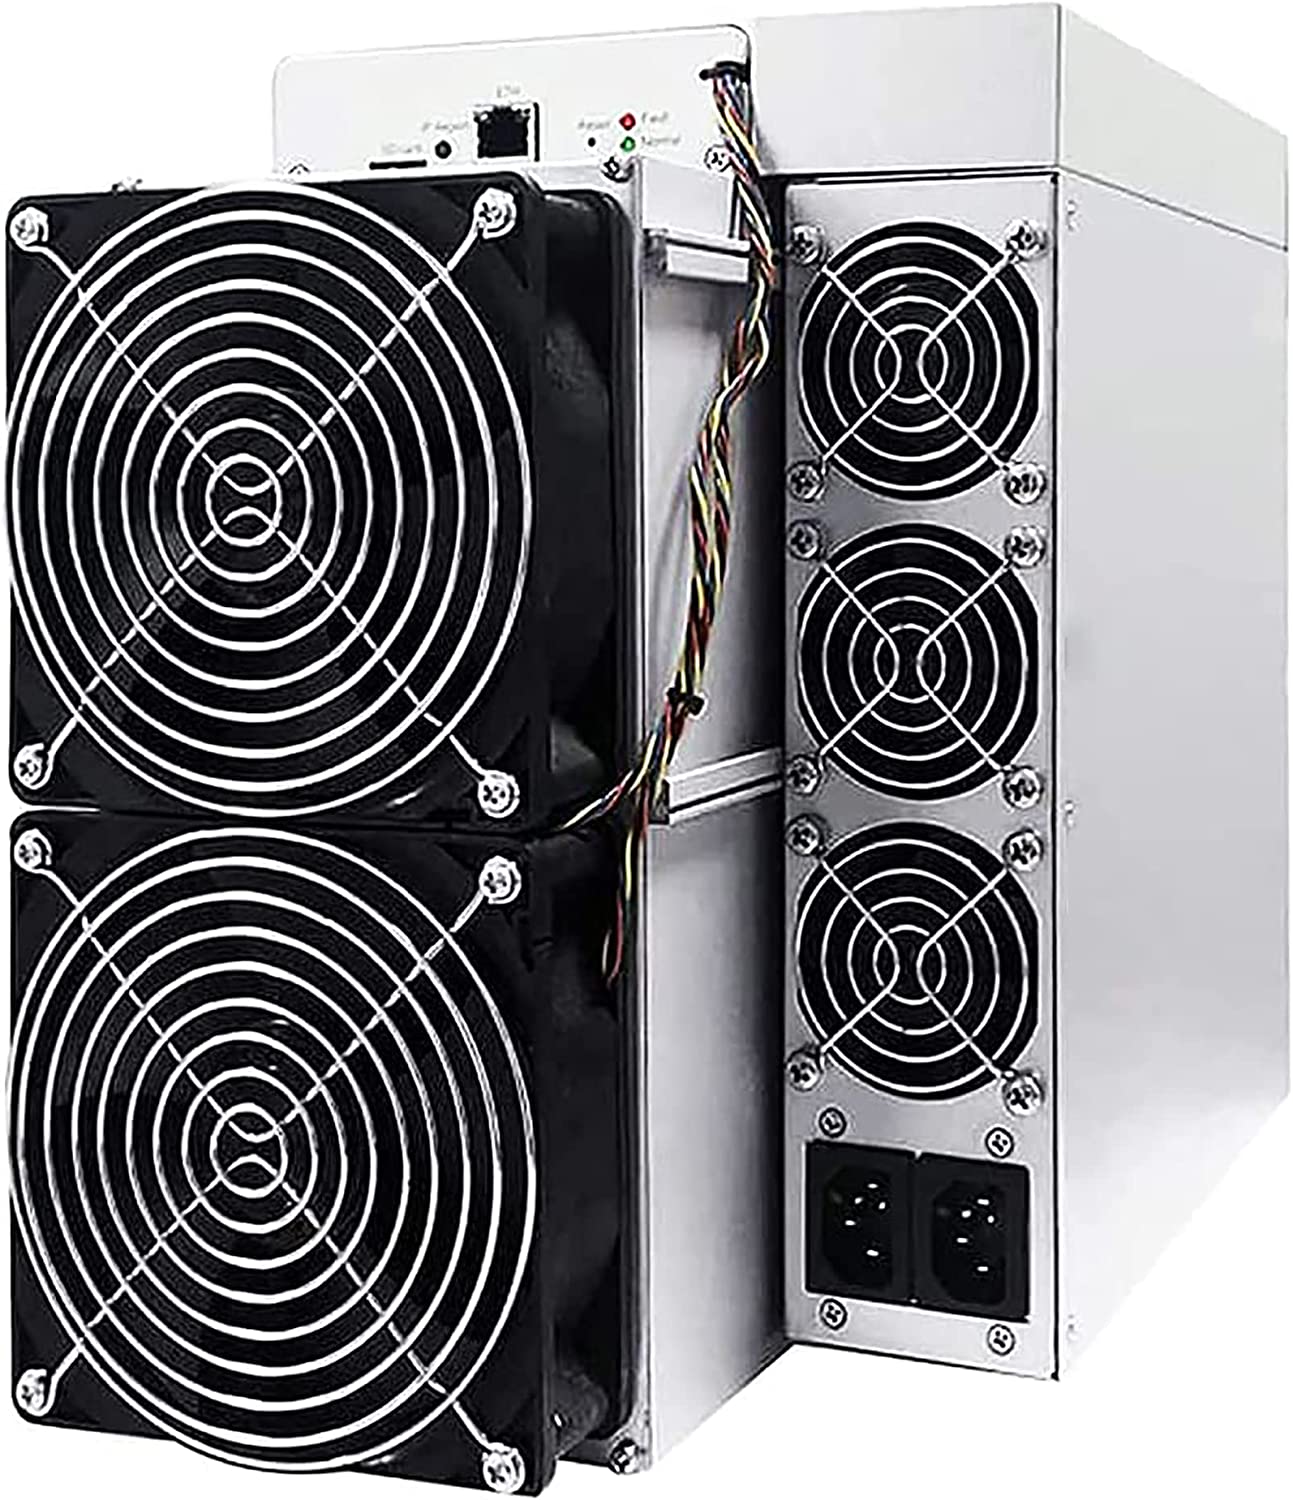 BRAND New Antminer S19 Pro 110th/s Bitcoin Miner, BTC BCH Asic Miner Bitcoin Miner Machine Antminer S19 WITH  PSU